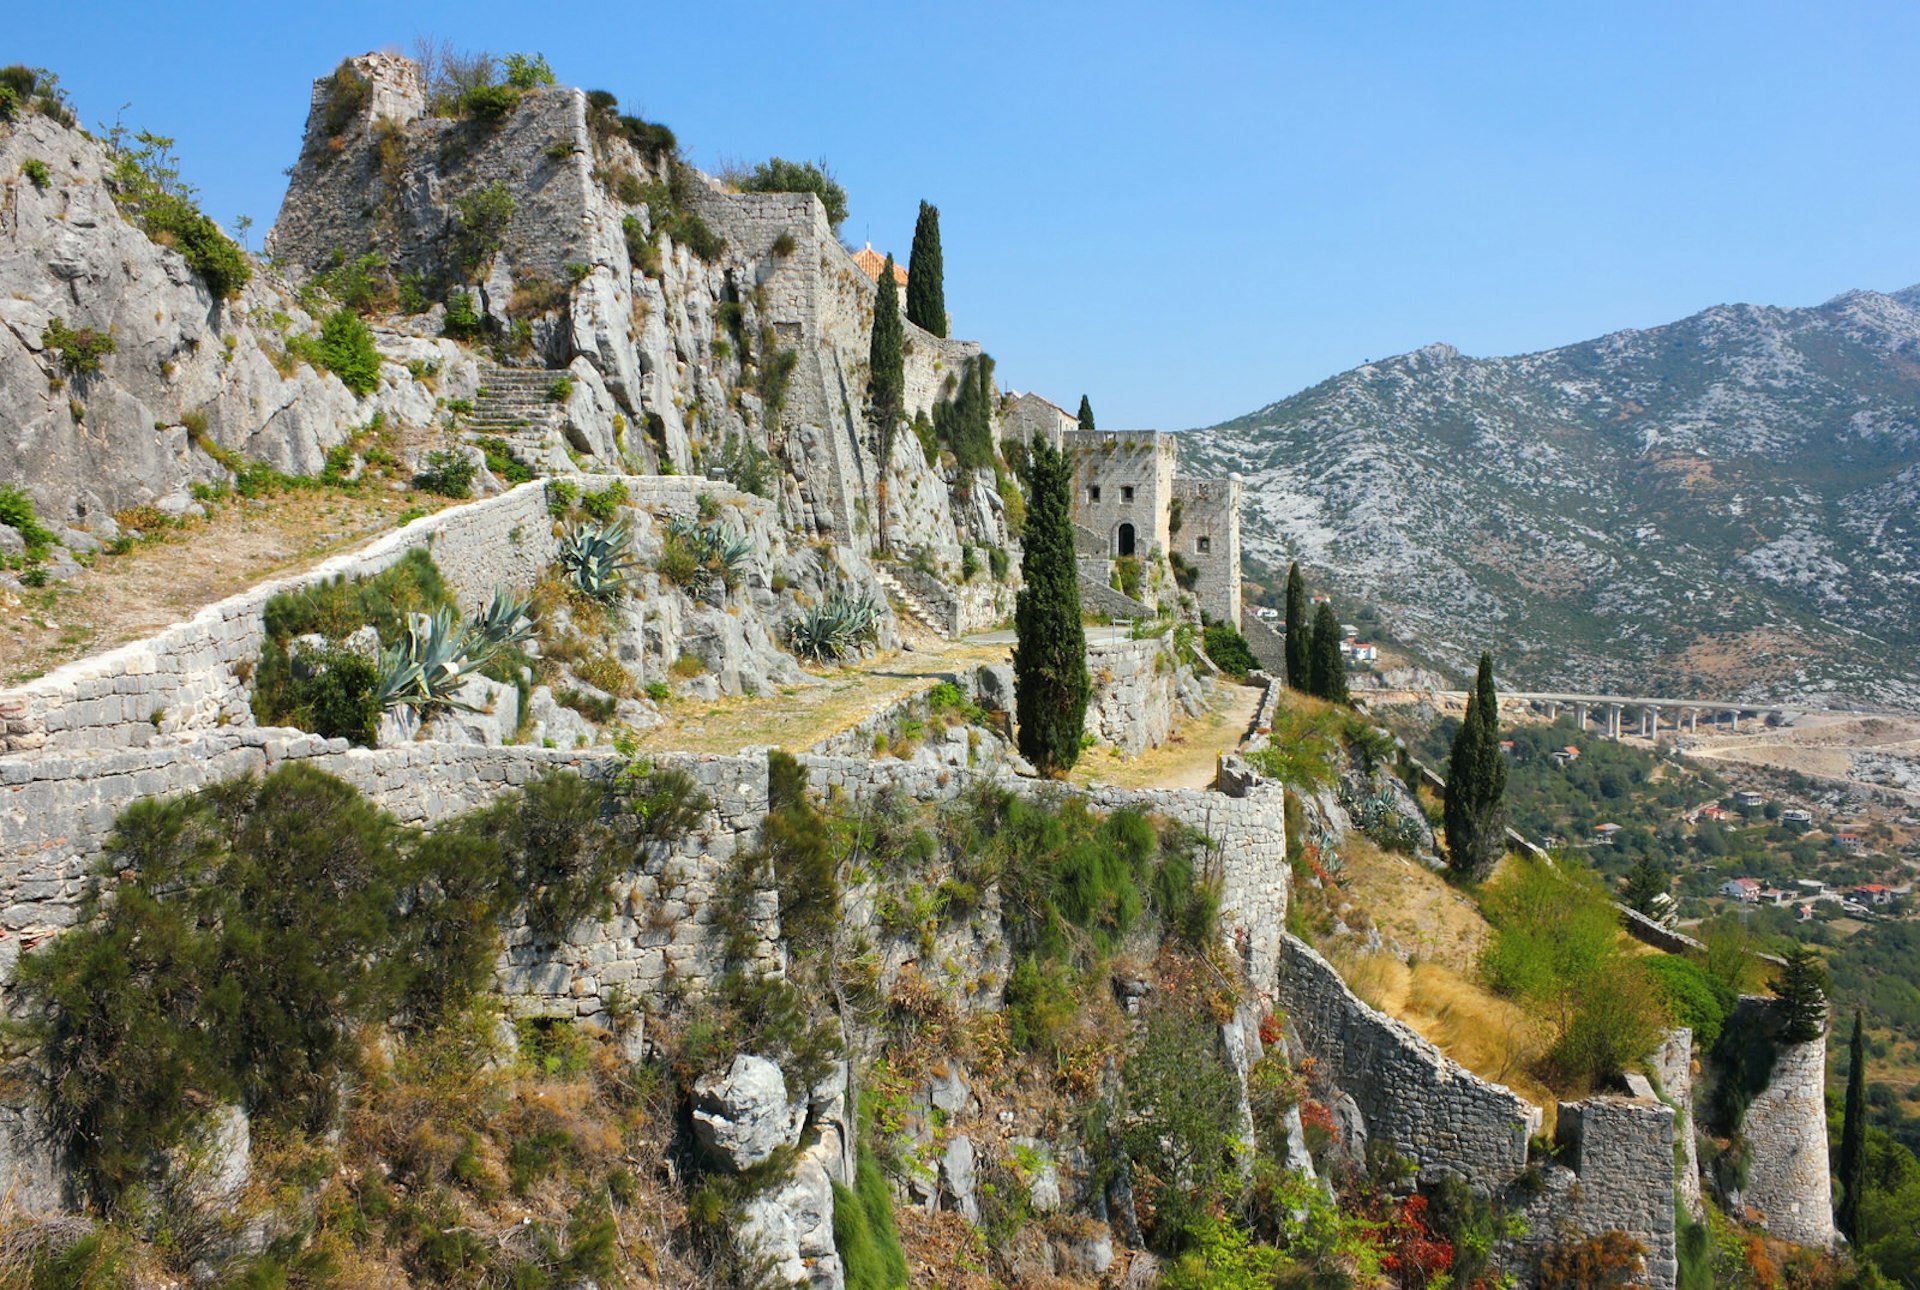 Klis Fortress was used to represent the walls of Meereen